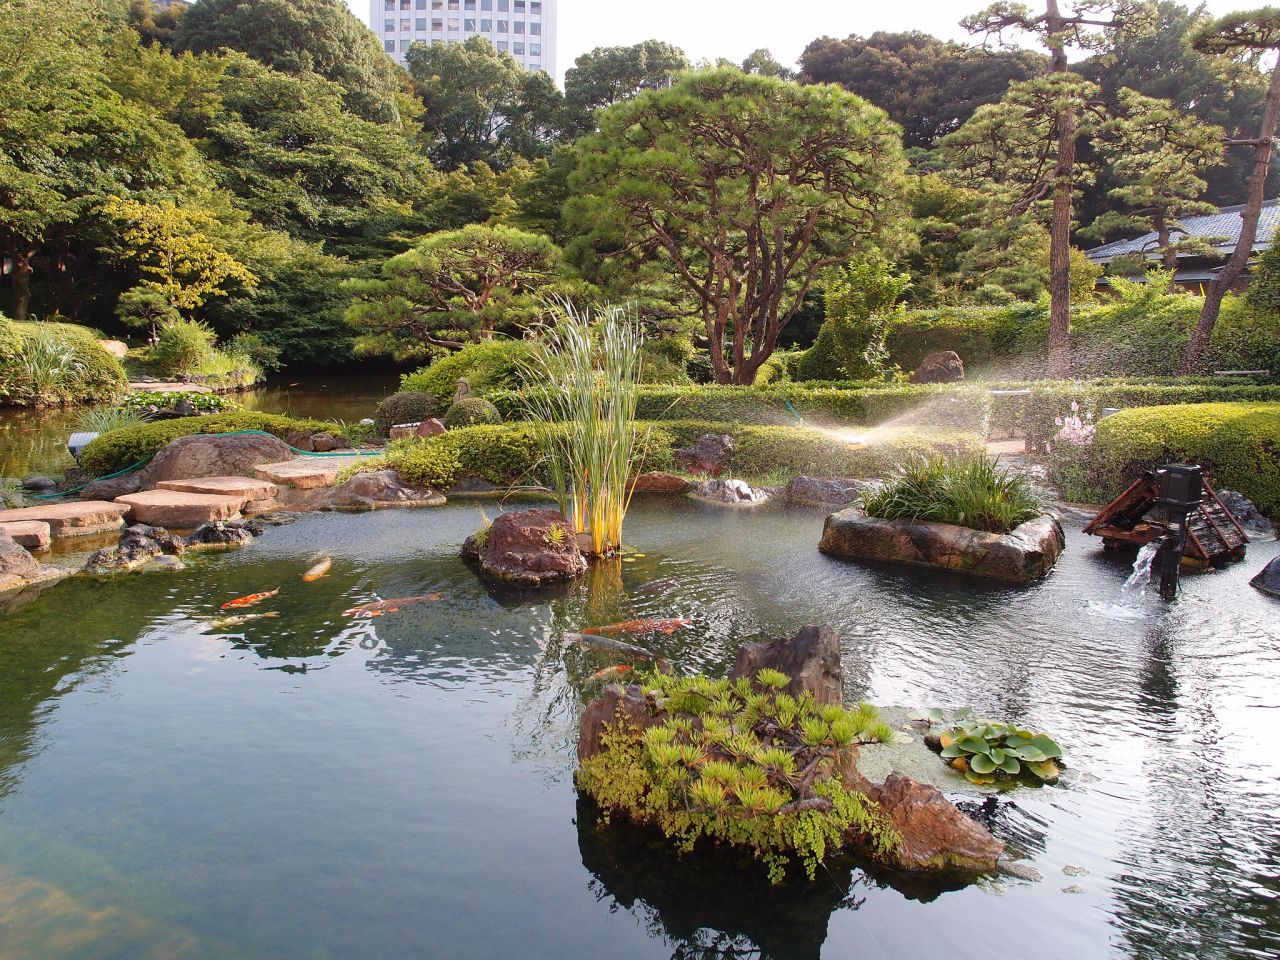 Hotel New Otani is known for its beautiful gardens.